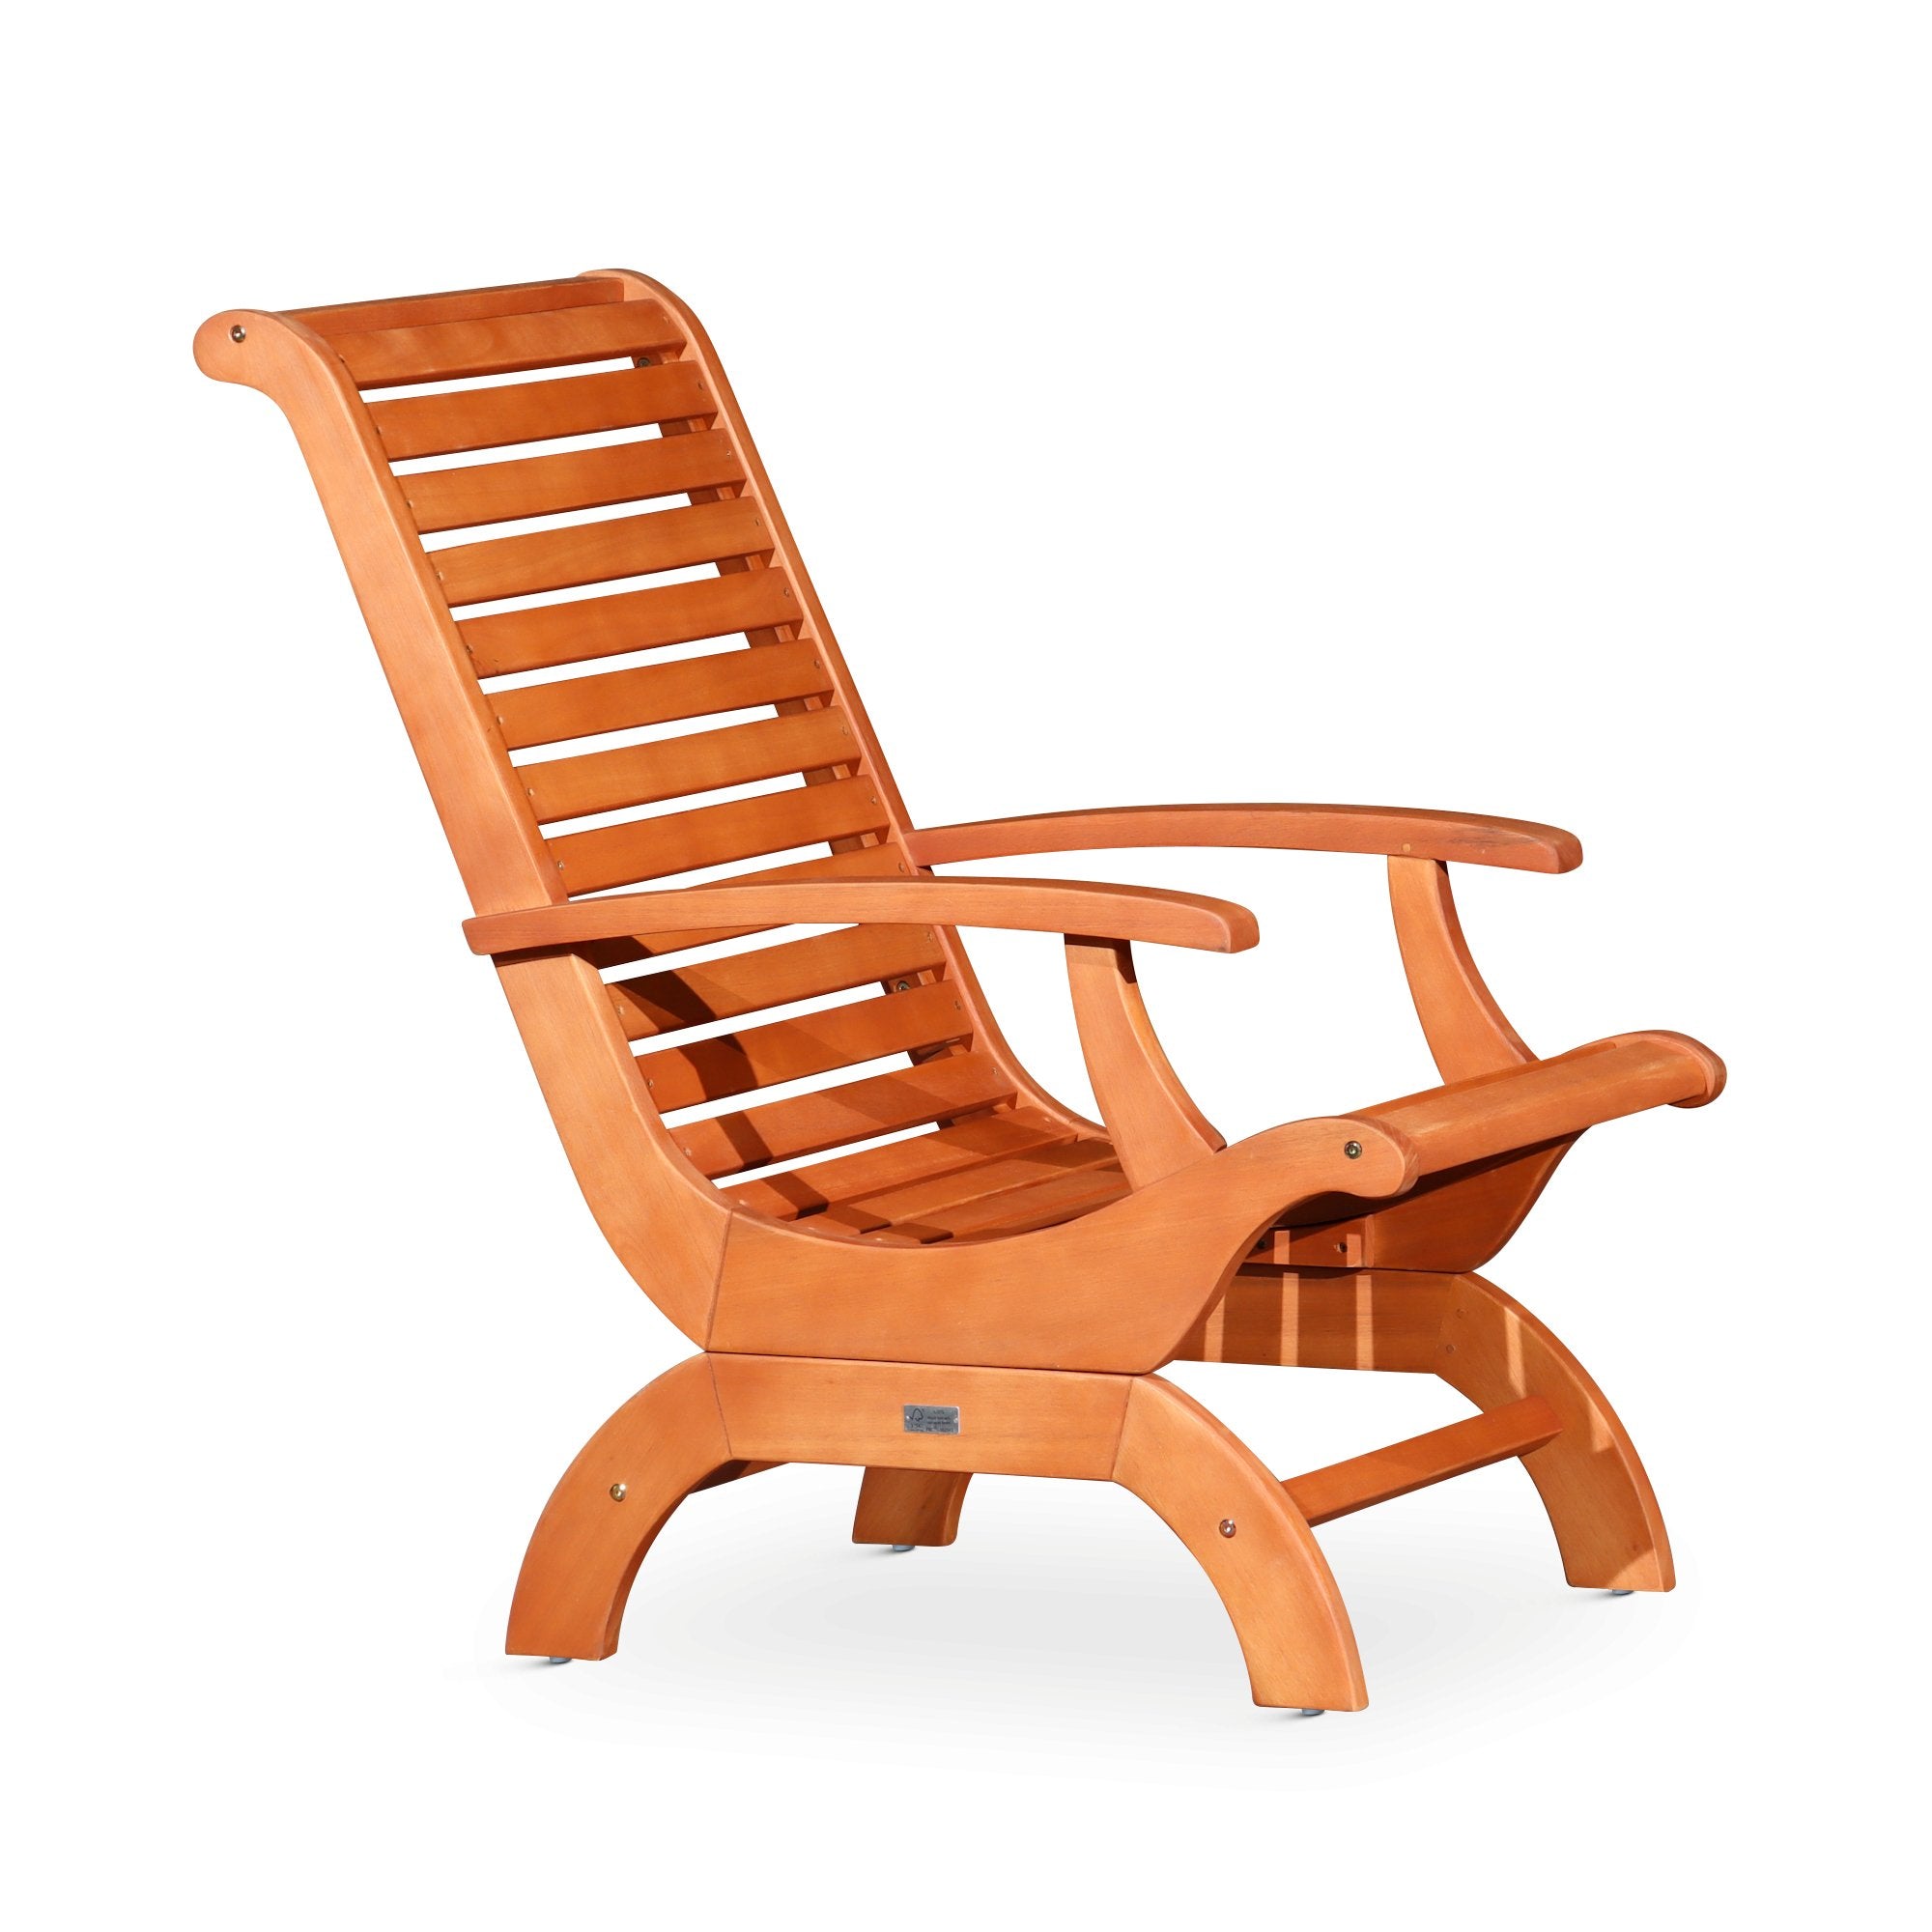 Outdoor Plantation Chair - Tuesday Morning-Outdoor Chairs